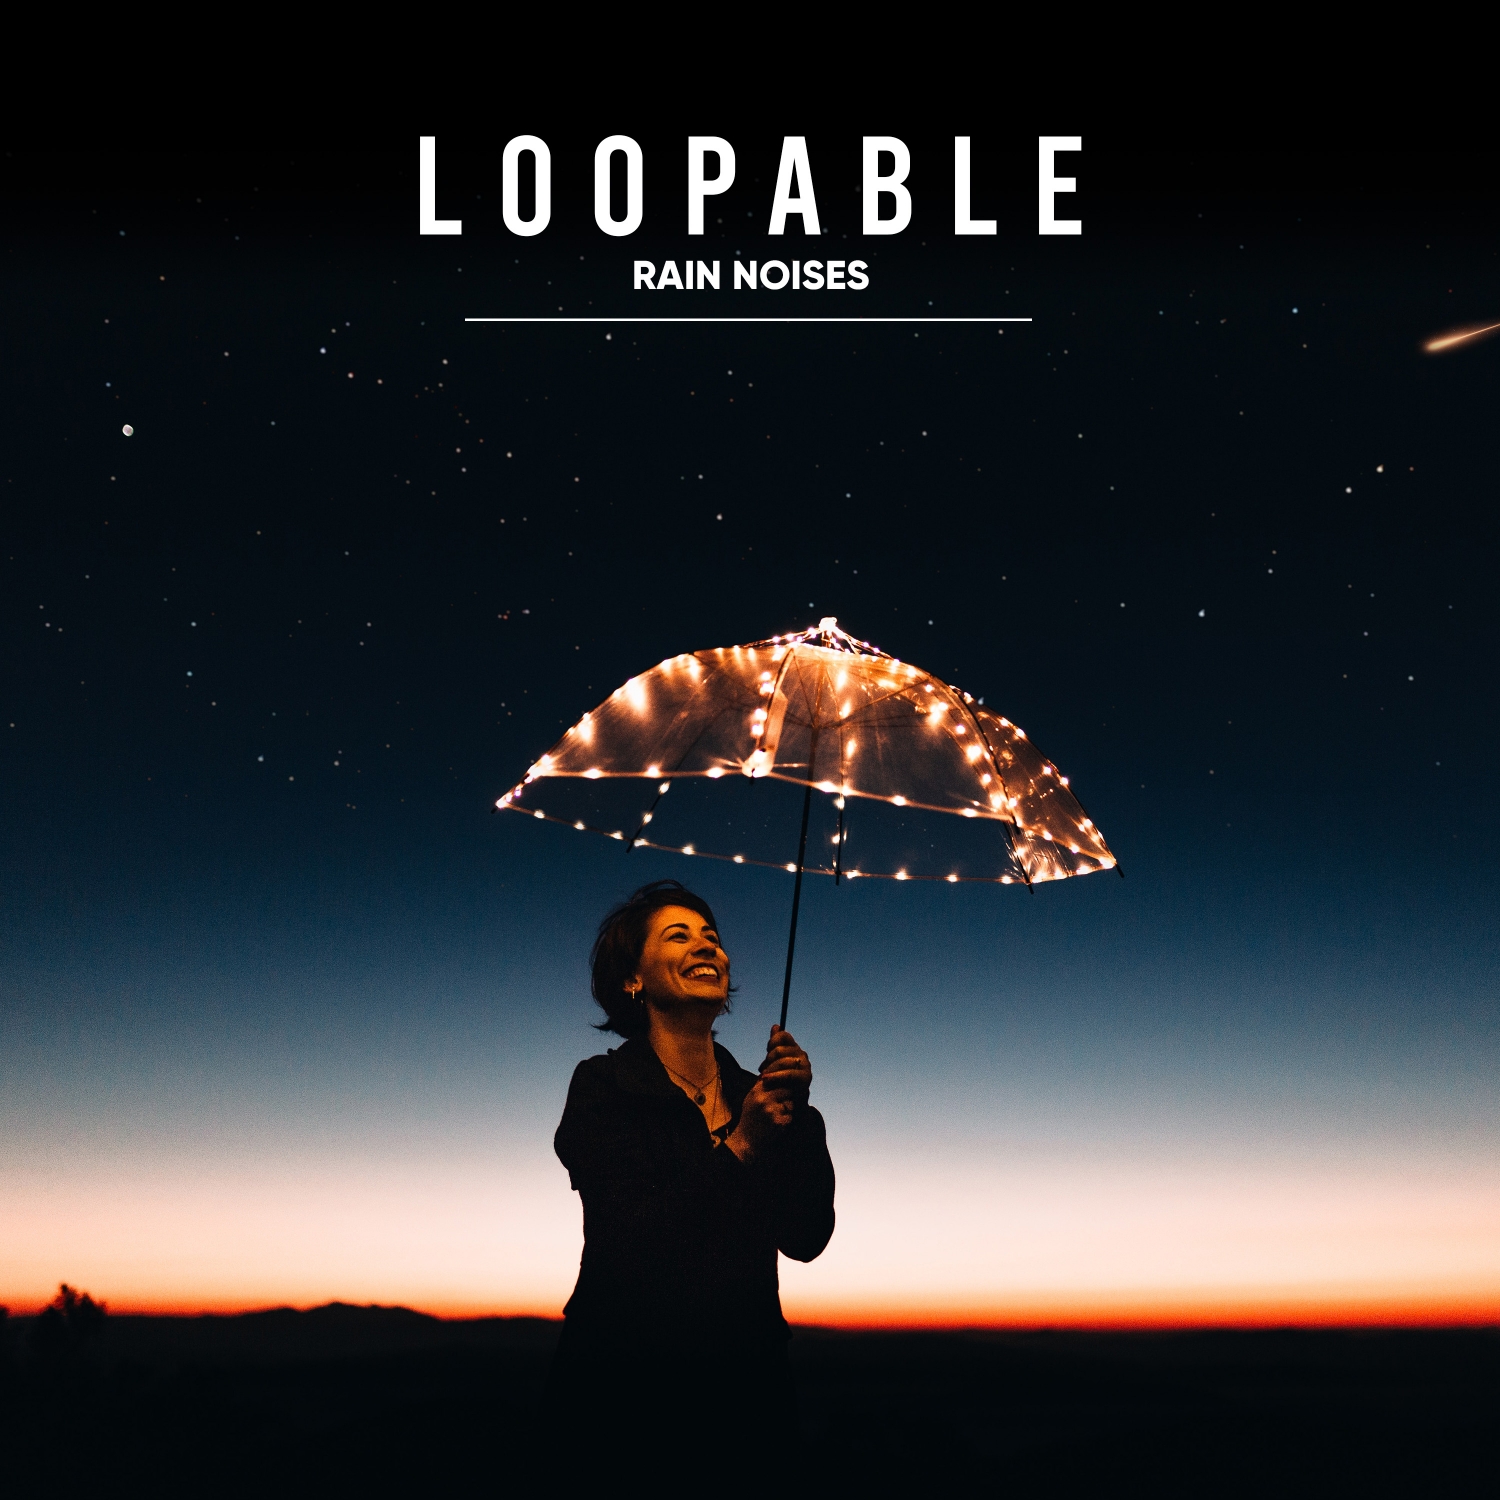 11 Loopable Rain Noises to Calm the Mind & Relax